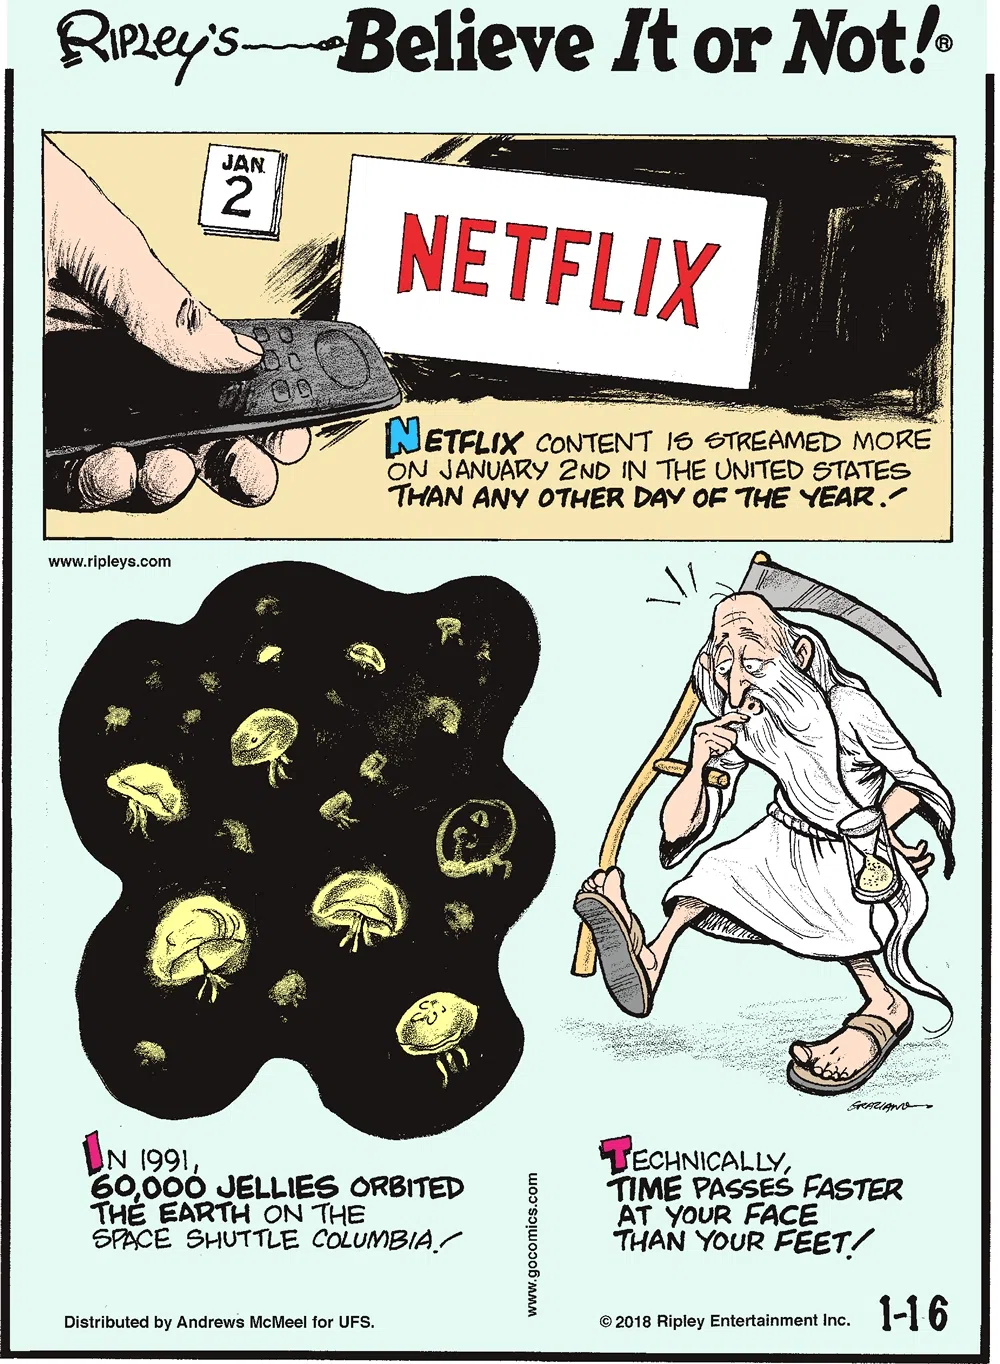 Netflix content is streamed more on January 2nd in the United States than any other day of the year!-------------------- In 1991, 60,000 jellies orbited the Earth on the space shuttle Columbia!-------------------- Technically, time passes faster at your face than your feet!